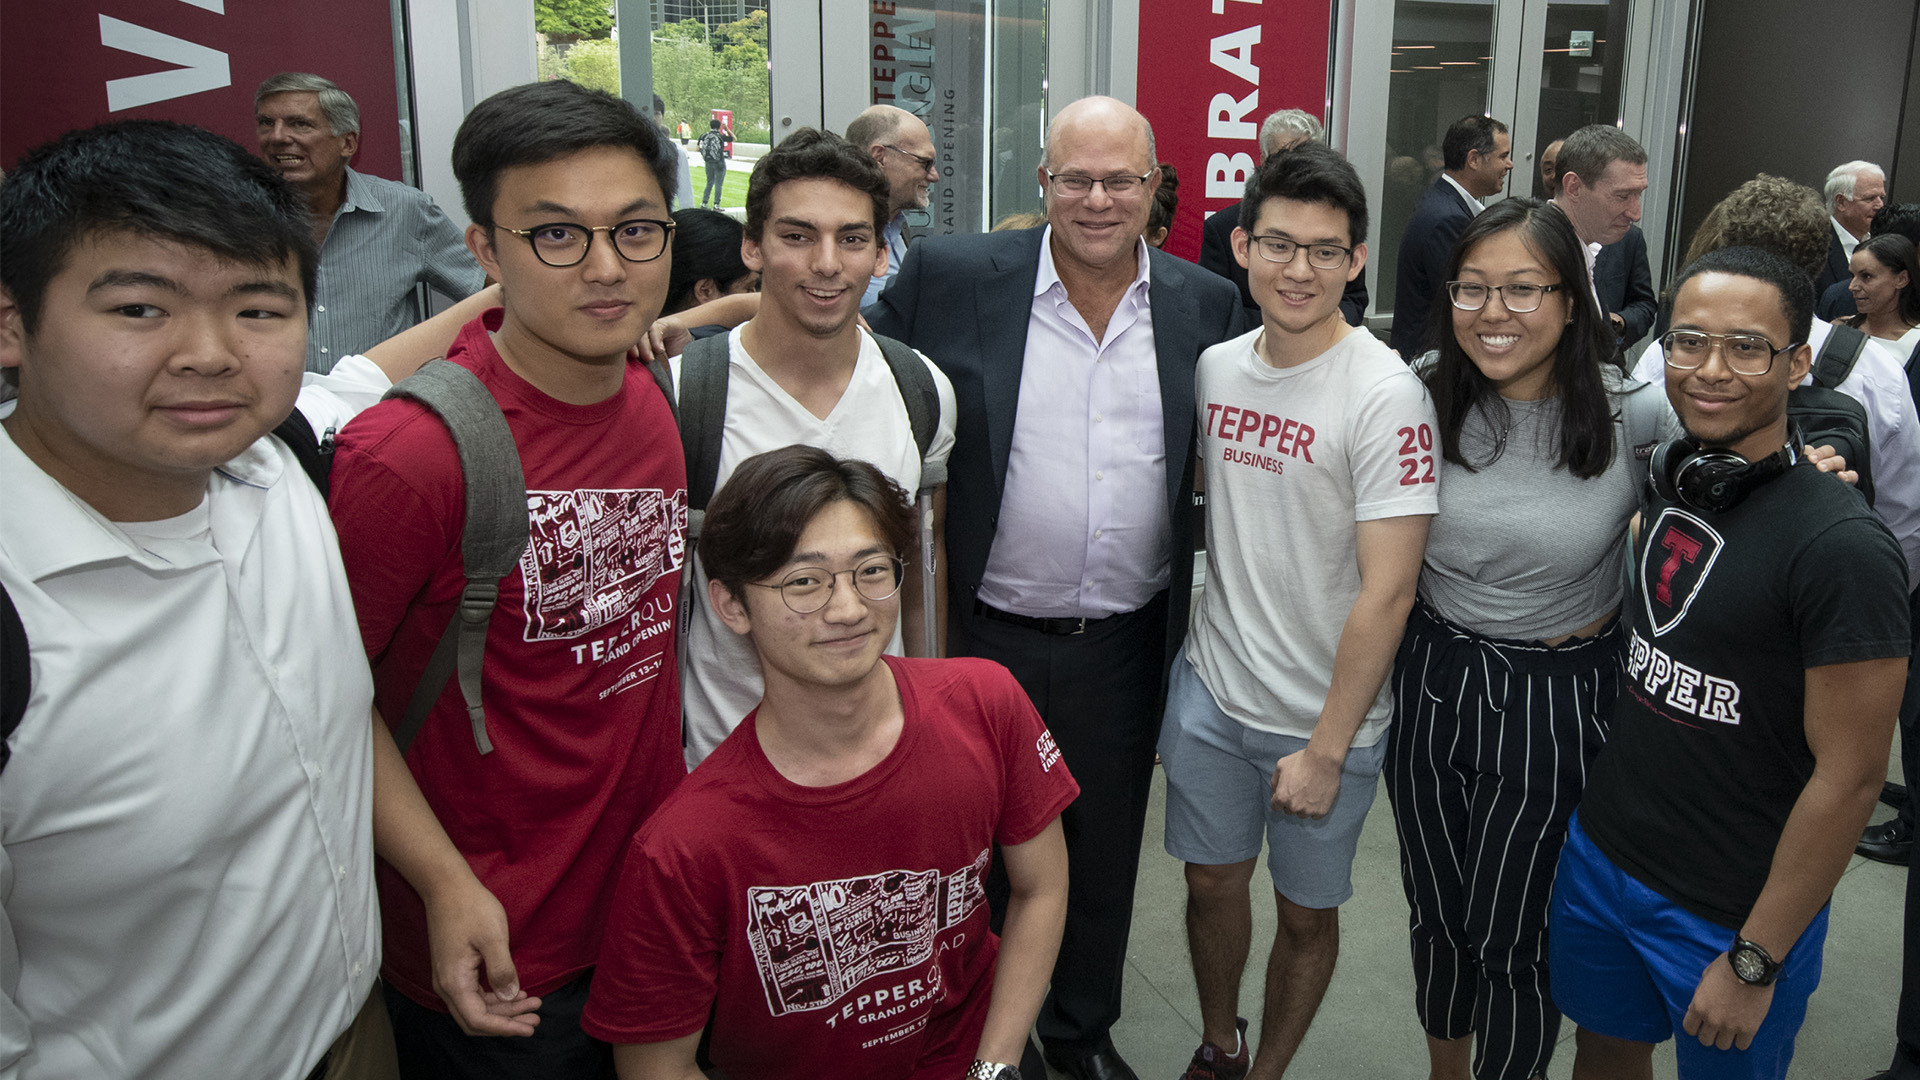 Carnegie Mellon Receives $67 Million Gift from David Tepper to